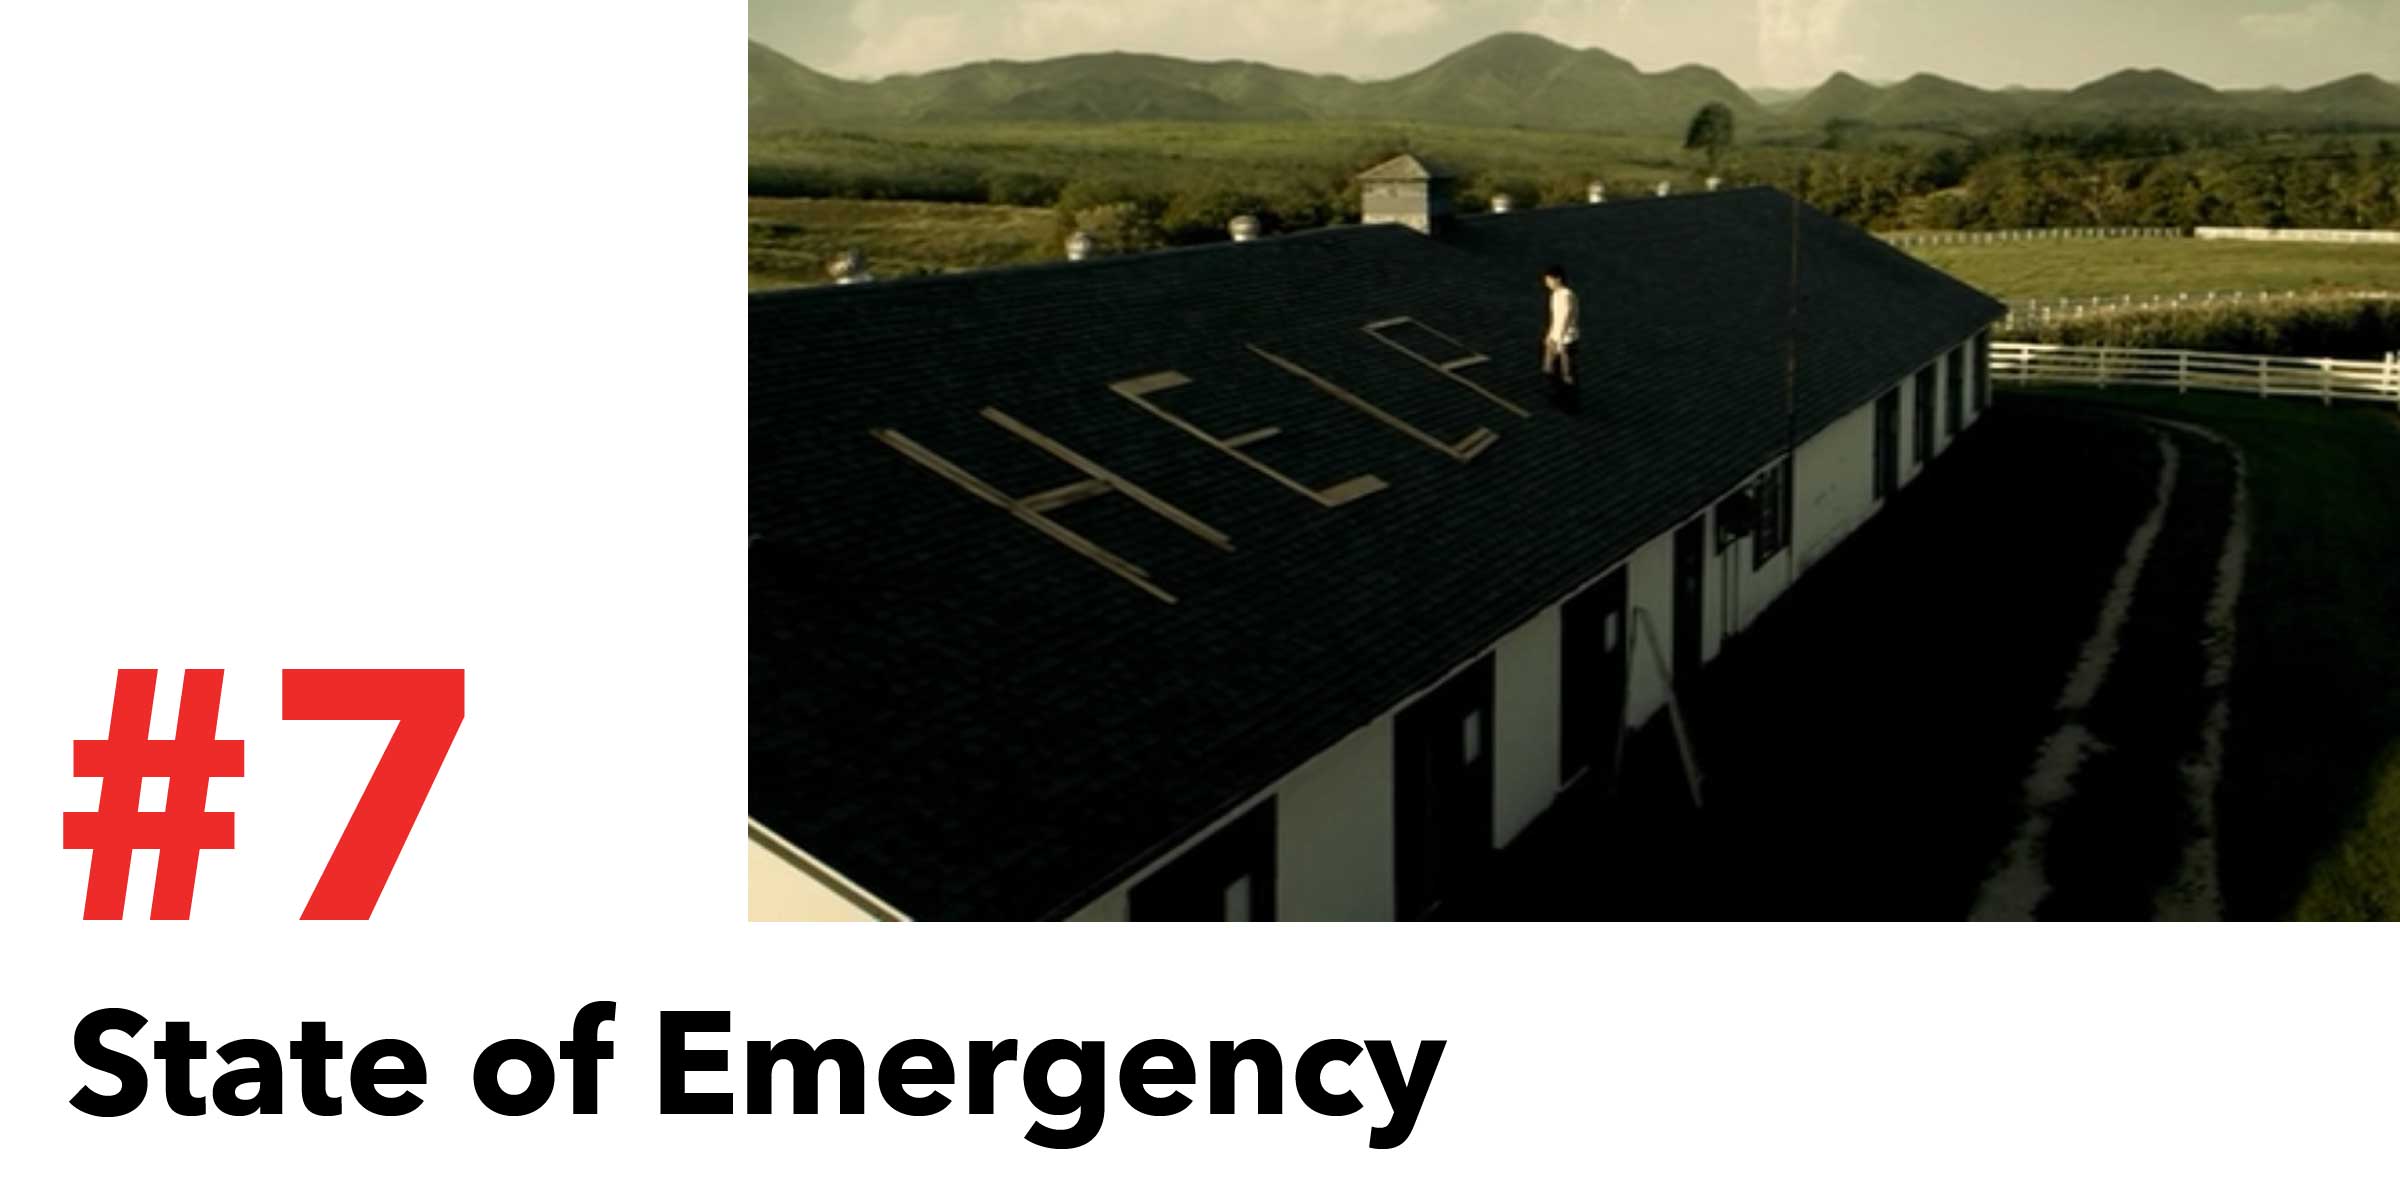 State of Emergency is #7 in the Top 10 Post Apocalyptic Movies on Netflix. Pictured, a man writes help on his roof for rescue.